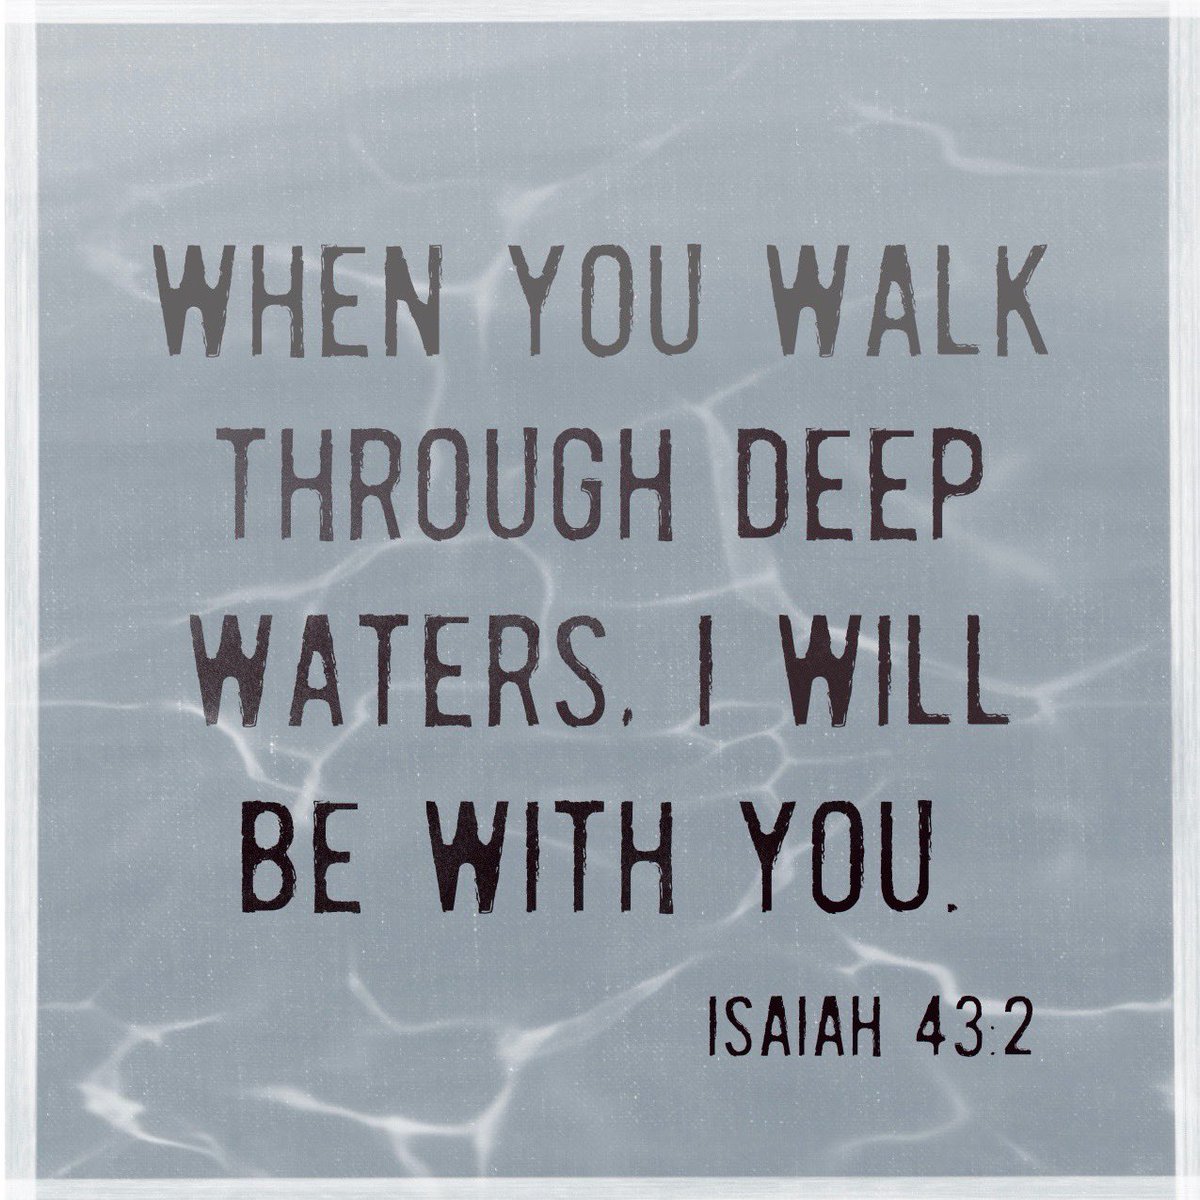 When you pass through the waters, I will be with you; and through the rivers, they shall not overwhelm you; when you walk through fire you shall not be burned, and the flame shall not consume you.” Isaiah 43:2